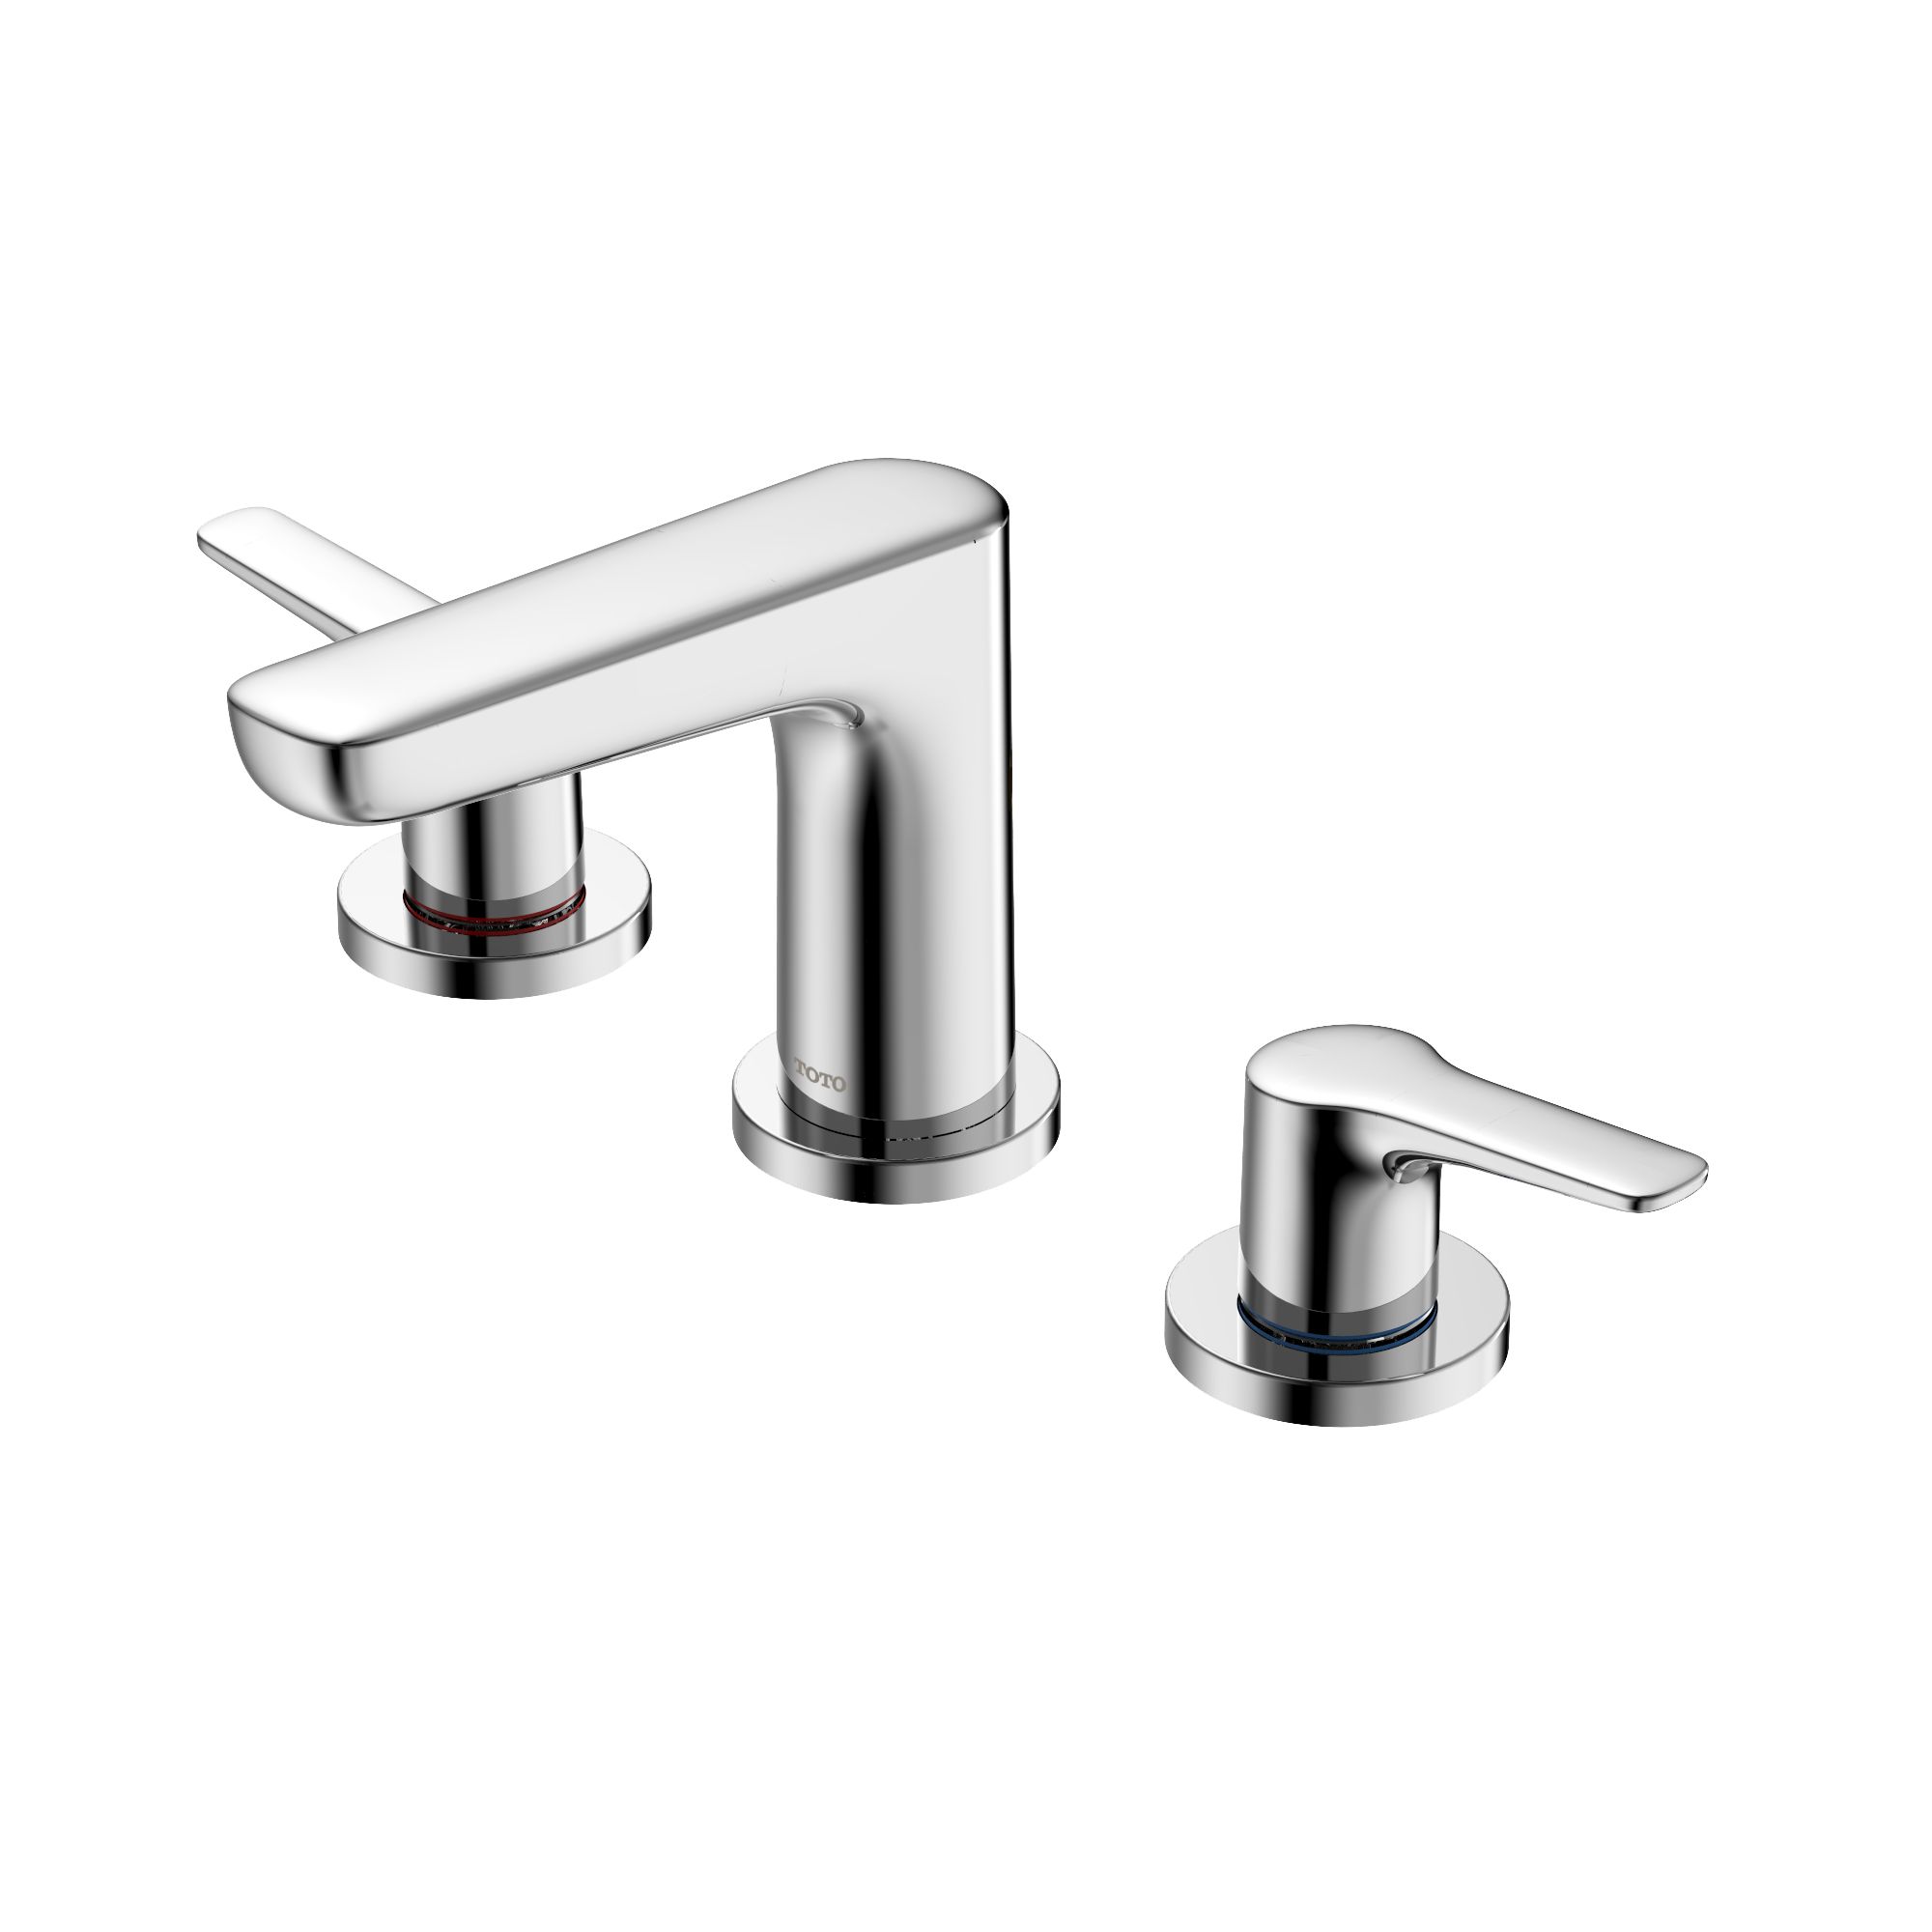 GS Widespread Faucet - 1.2 GPM